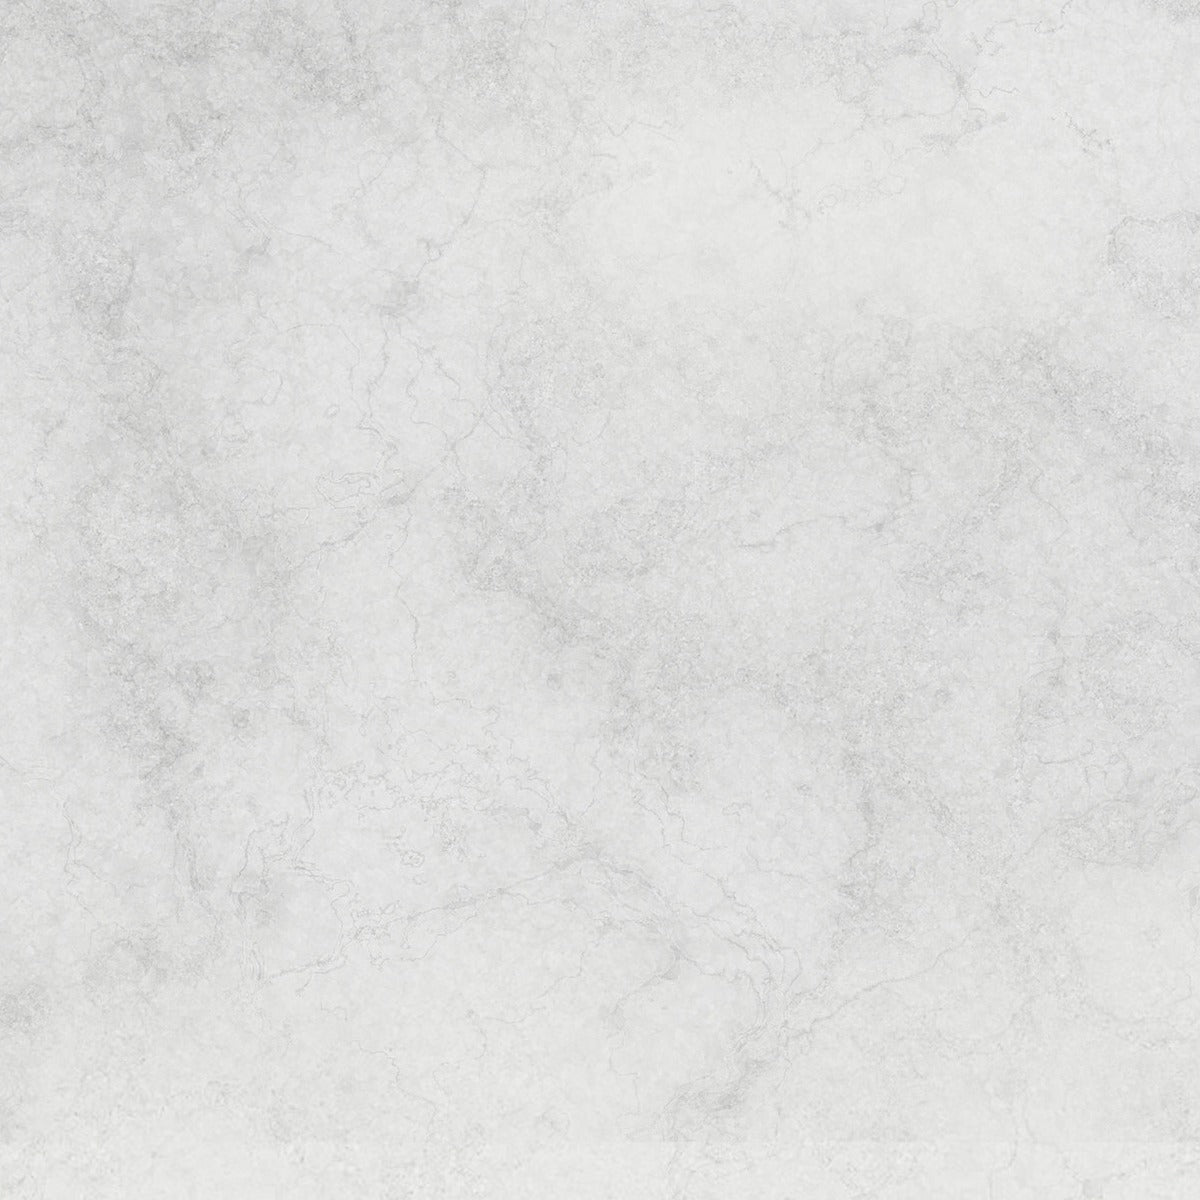 Tarla PVC Panel Ceiling Grey Marble Cladding 250mm X 2700mm X 5mm (Pack Of 4)